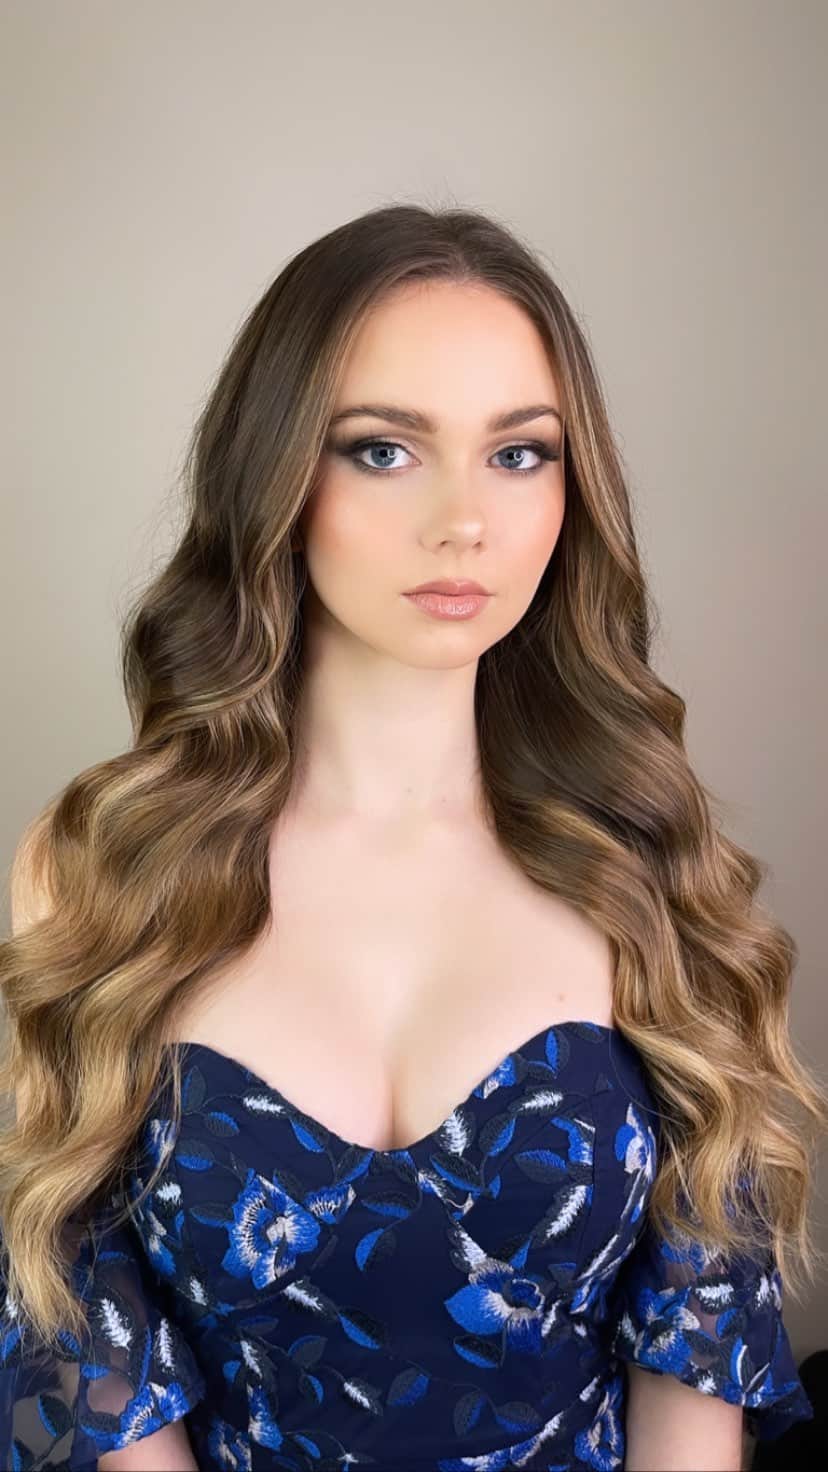 Dana Raeのインスタグラム：「The difference a hairstyle can make 💙  Thank you @sittingprettyhalohair for this beautiful halo and the talented @phoebetranmua for creating this look  •⠀⠀⠀⠀⠀⠀⠀⠀ •⠀⠀ ⠀⠀⠀⠀⠀⠀ •⠀⠀⠀⠀⠀⠀ #sittingprettyhalohair #halohairextensions #hairvolume」